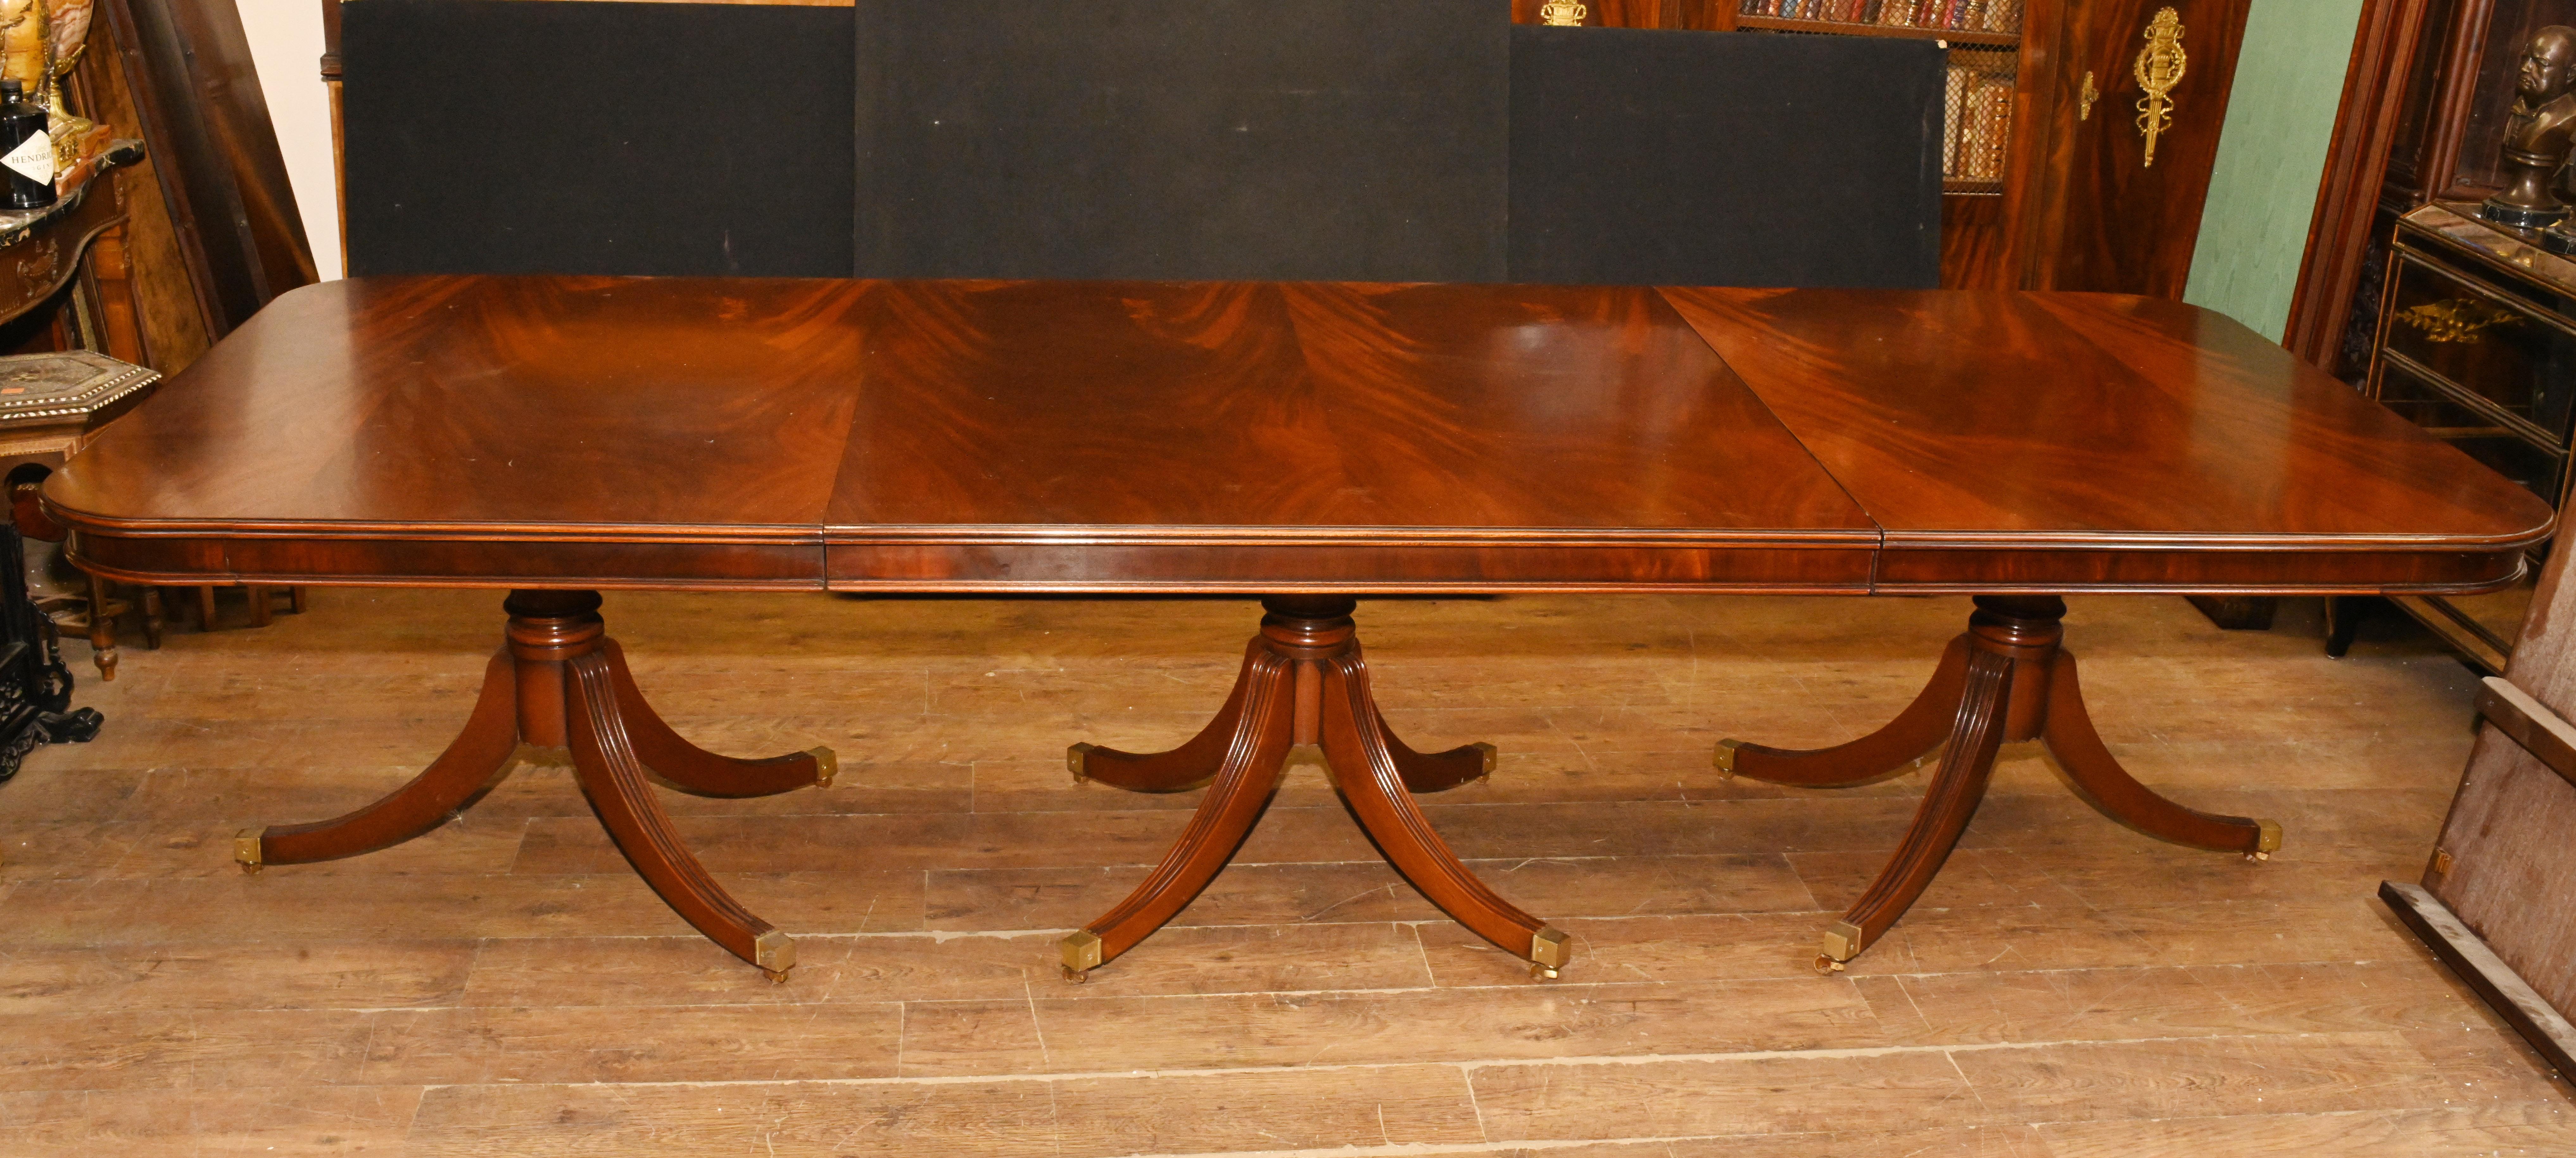 High end extending mahogany dining table in the Regency style
Extends to ten feet long (304 CM) and has two leaves each measuring 24 inches - 60 CM
Hence there are various different size configurations
Flame mahogany has a rich and sumptuous